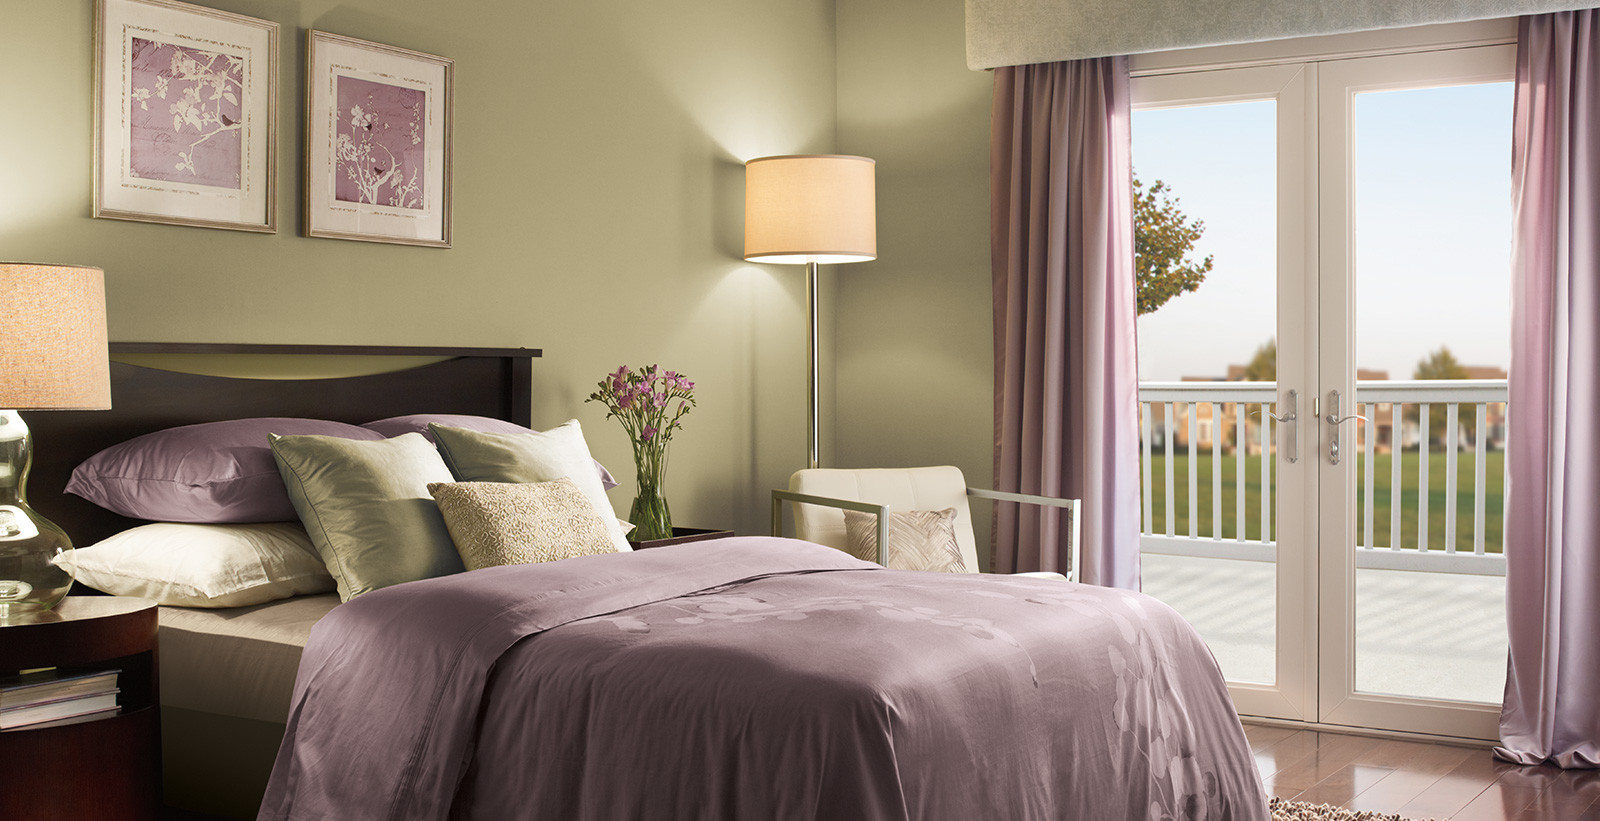 Behr Bedroom Colors
 Classic and Traditional Bedroom Ideas Paint Colors